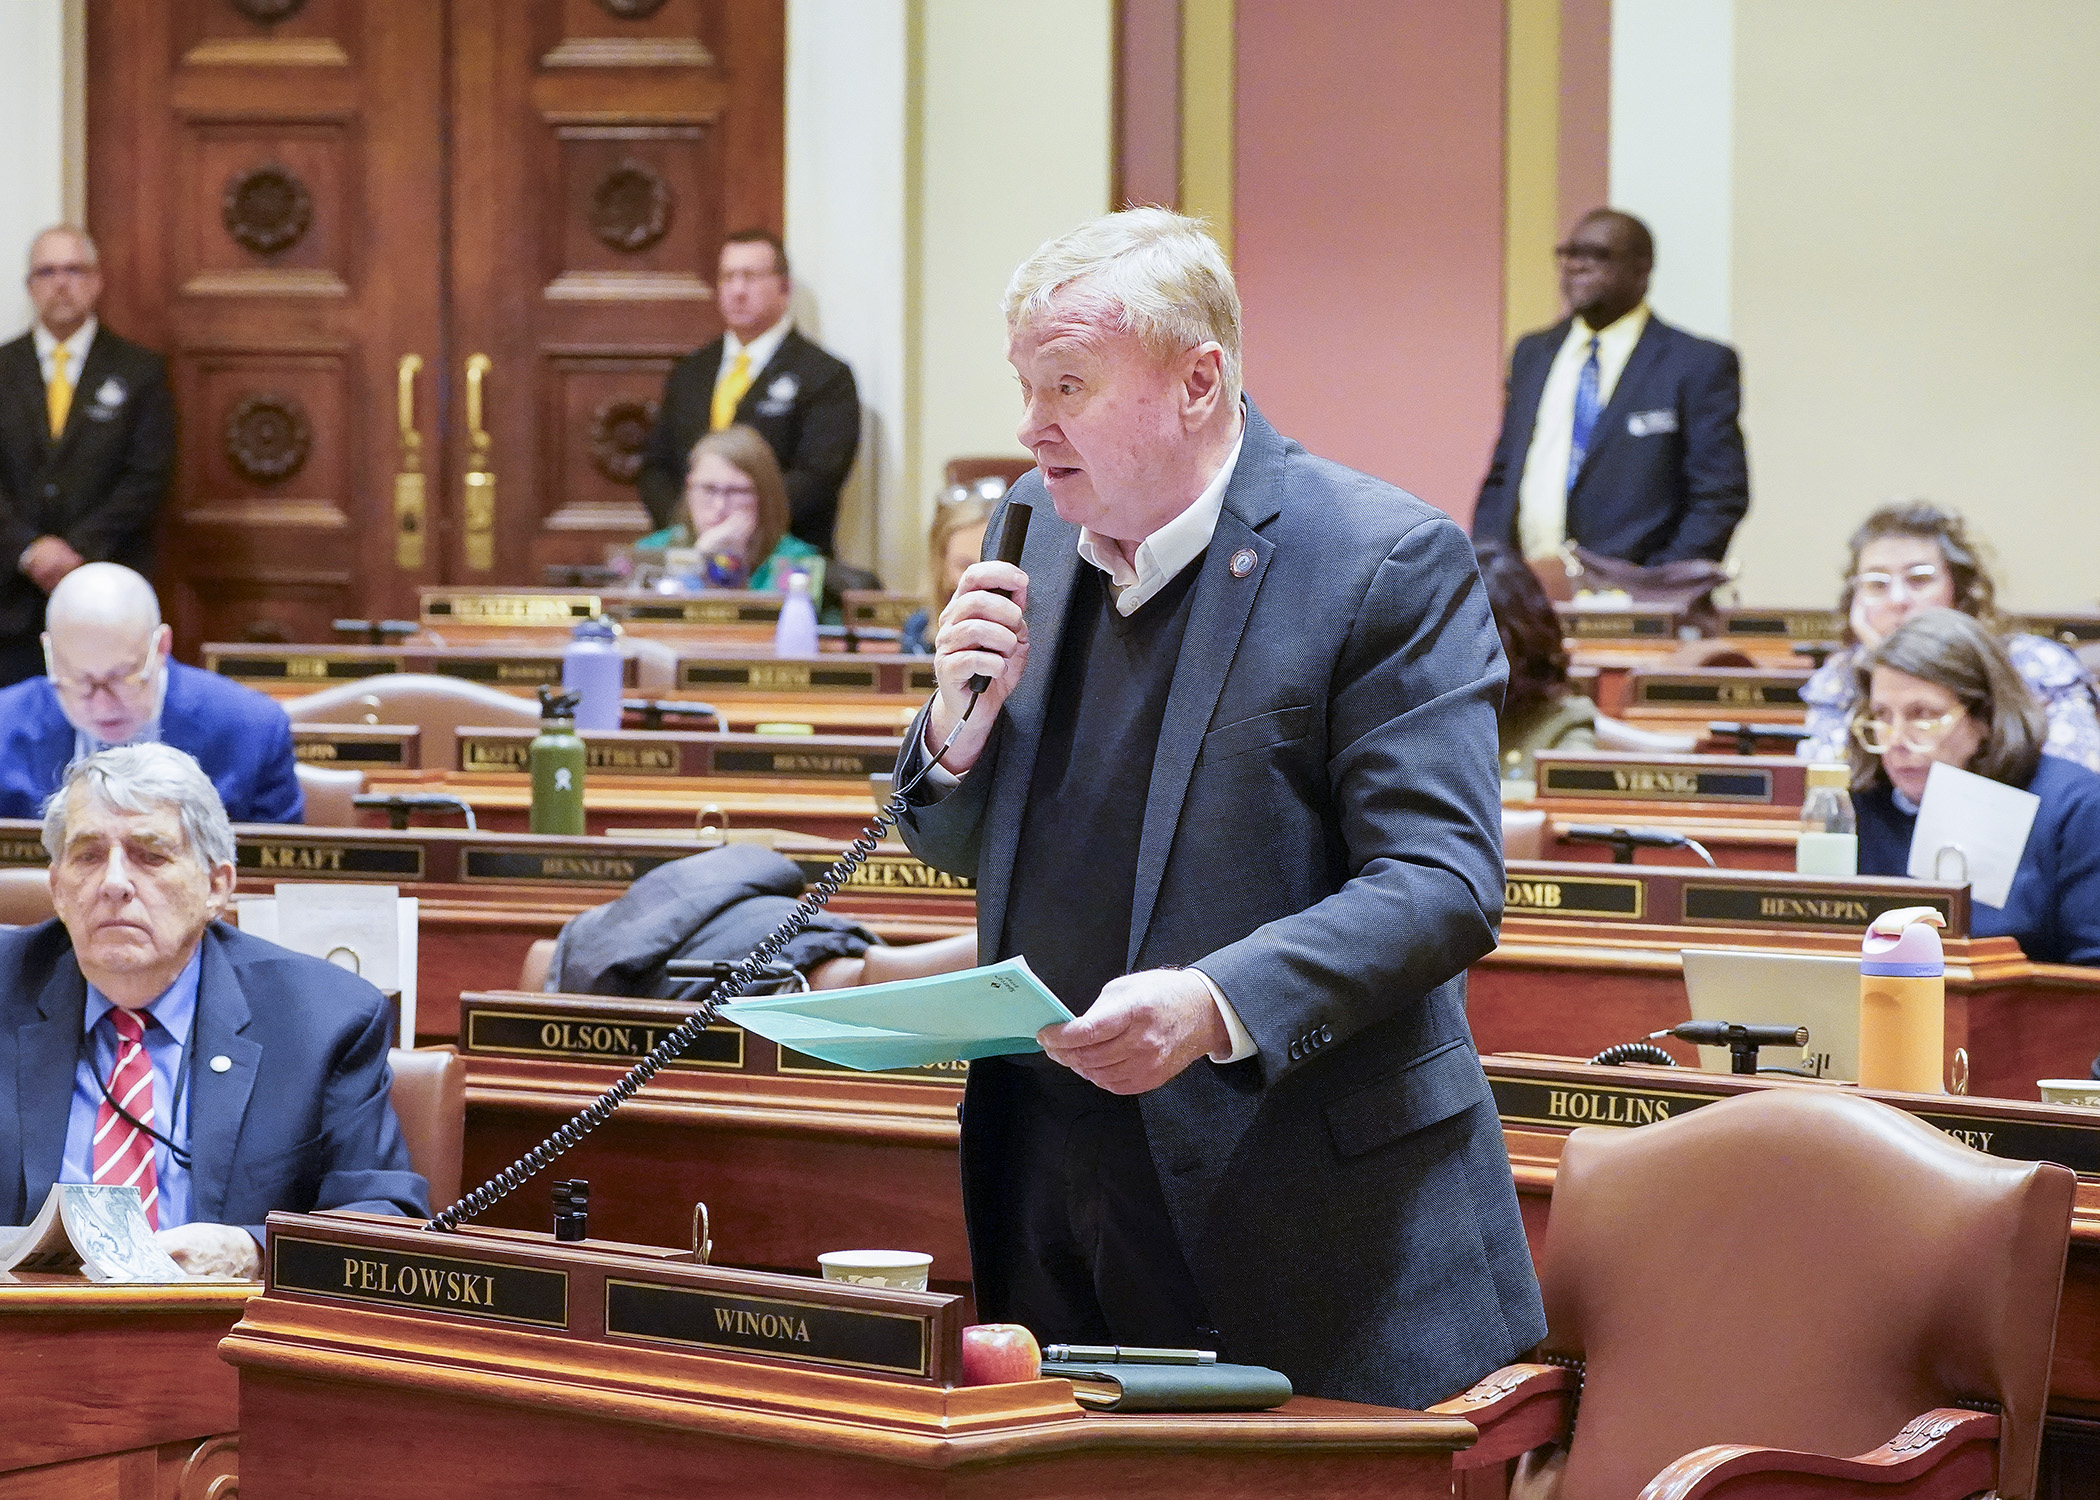 Rep. Gene Pelowski, Jr. presents the higher education policy bill on the House Floor April 4. (Photo by Andrew VonBank)